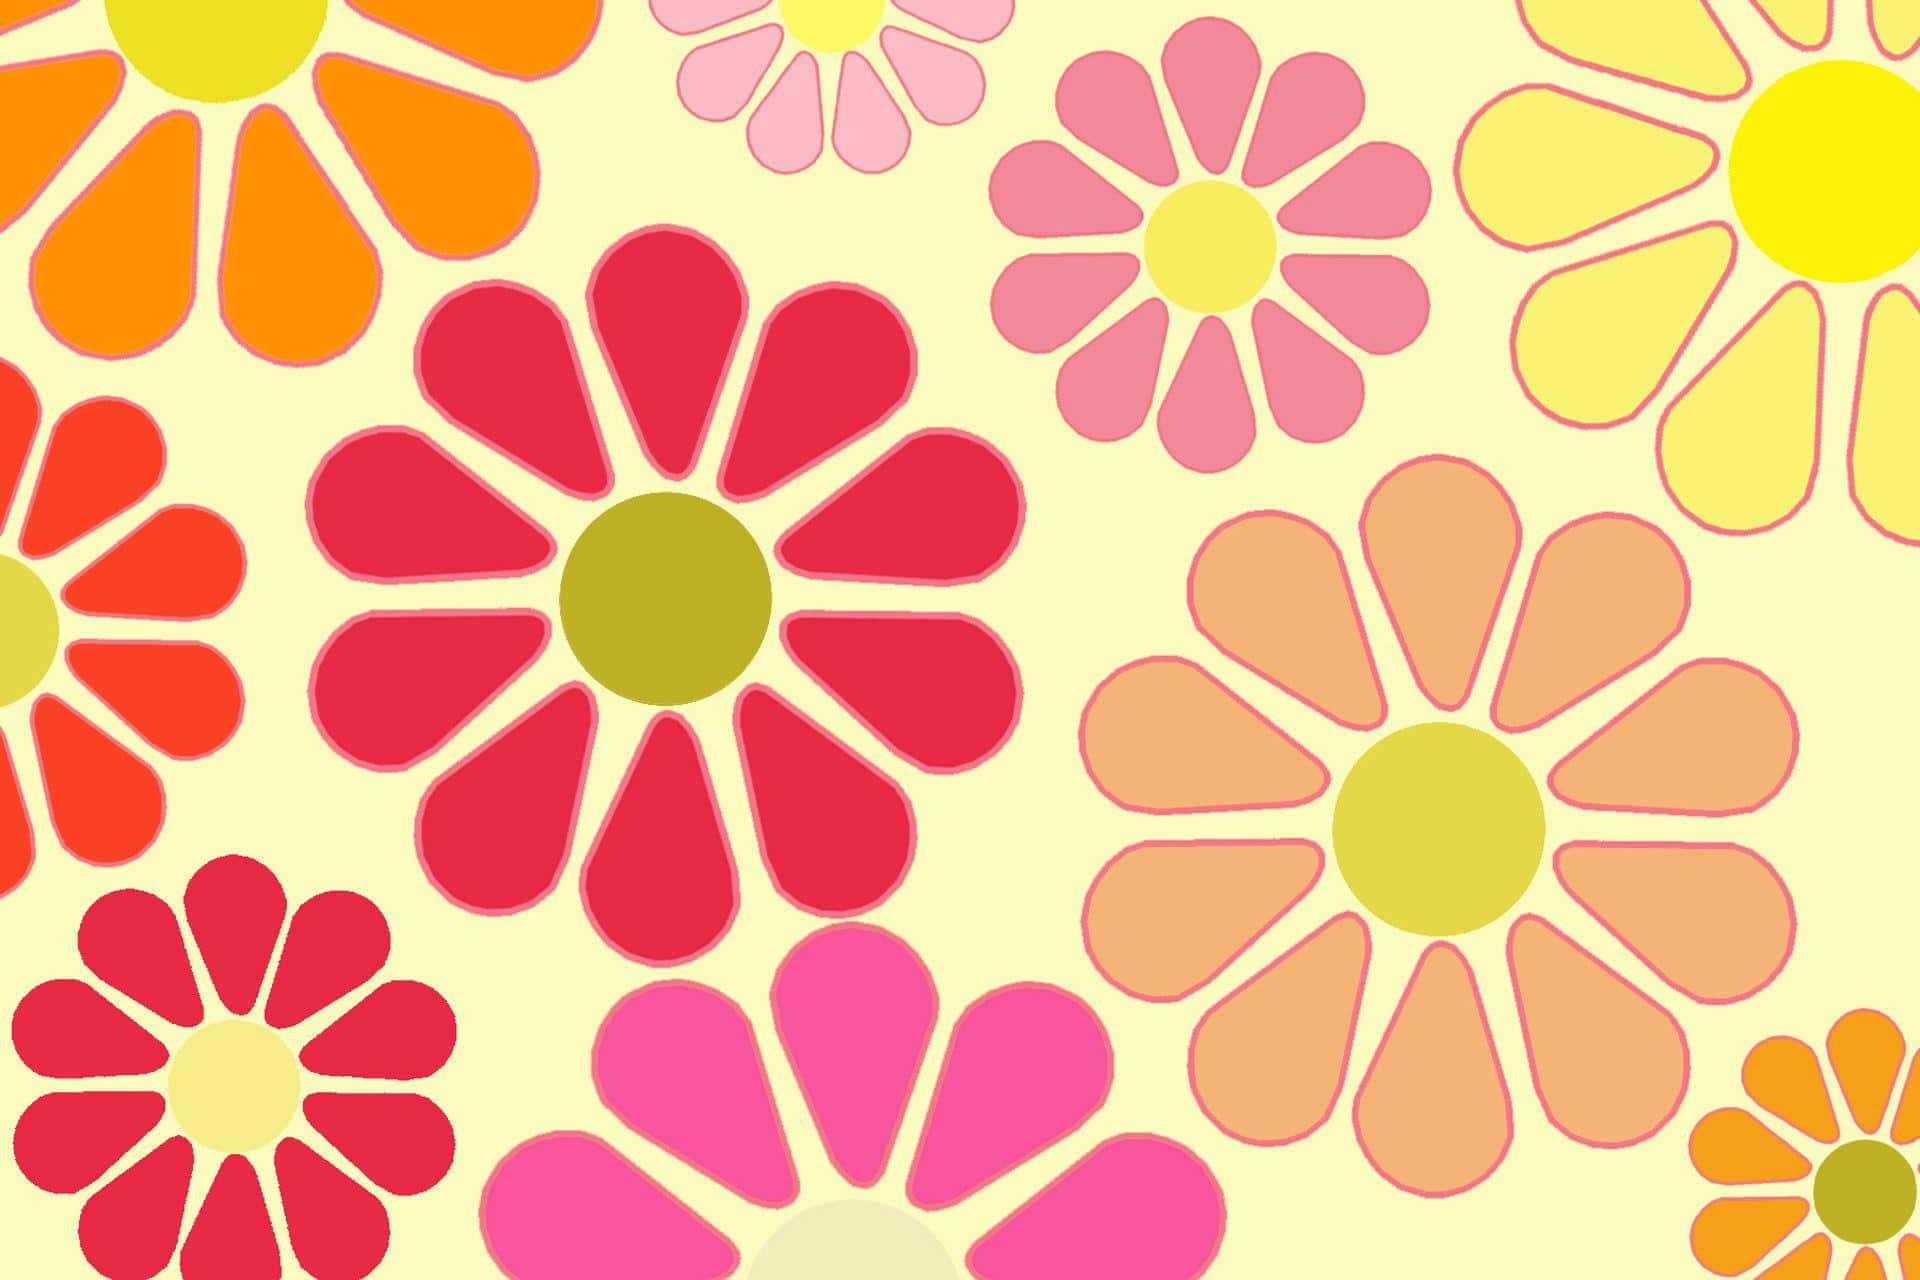 Discover New Groove With This Groovy Background